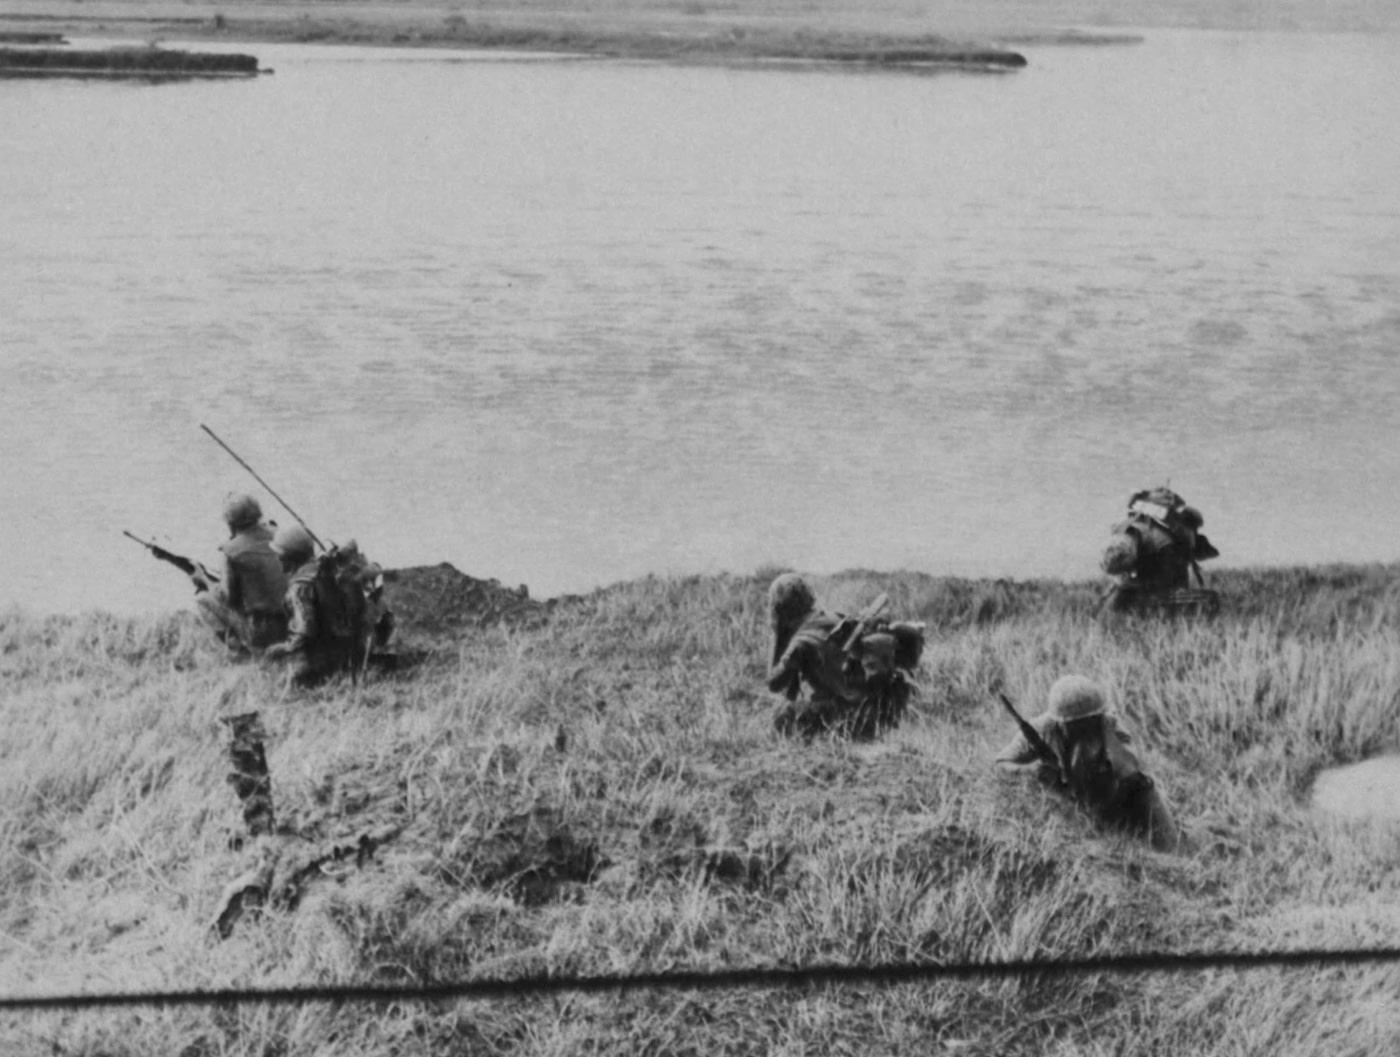 In this picture, ROK Marines set up a hasty defense on a barrier island near Da Nang in Vietnam. They are equipped with M16 rifles, M14 rifles a M71 LAW and a M79 grenade launcher. One Marine is a radioman with a combat radio as part of his military gear. A river is visible in the background. The Marines are in grass in the beach sand.